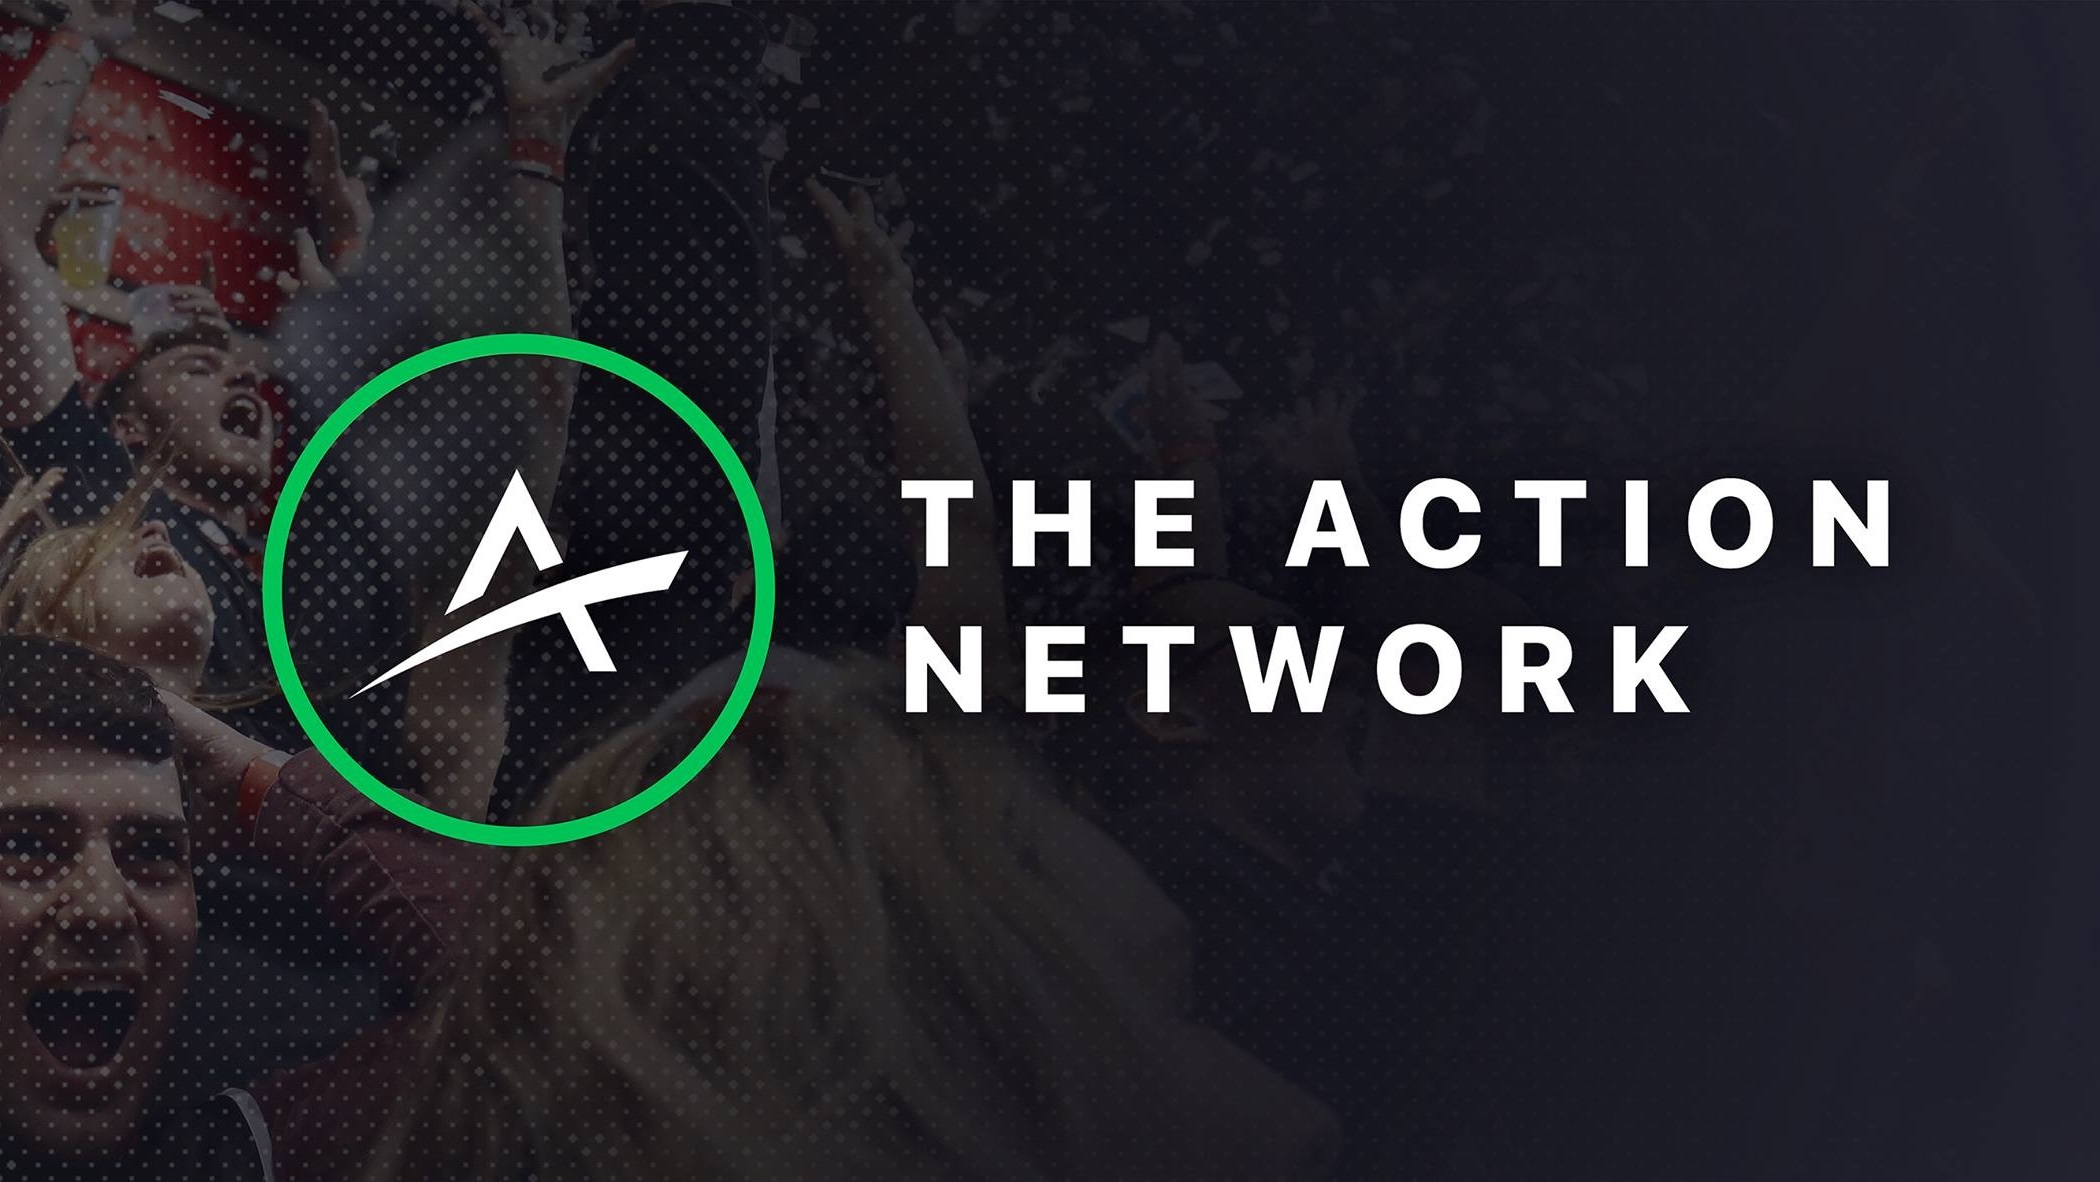 Miami Dolphins Owner Stephen Ross Invests in Action Network